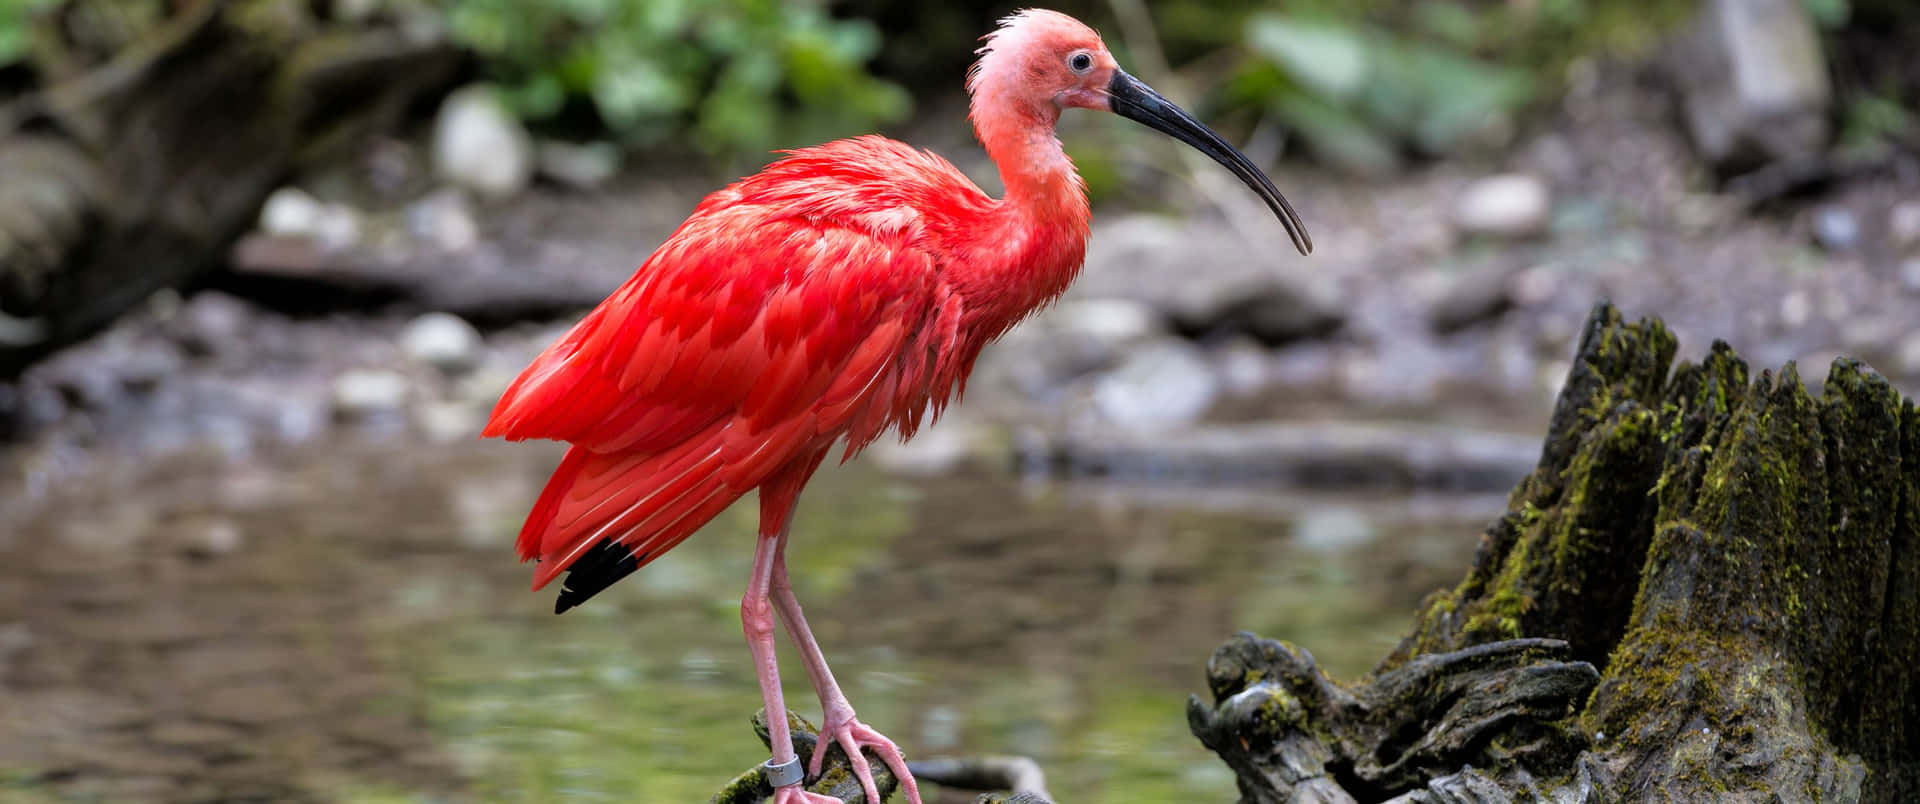 3440x1440 Animal Scarlet Ibis By The Stream Wallpaper